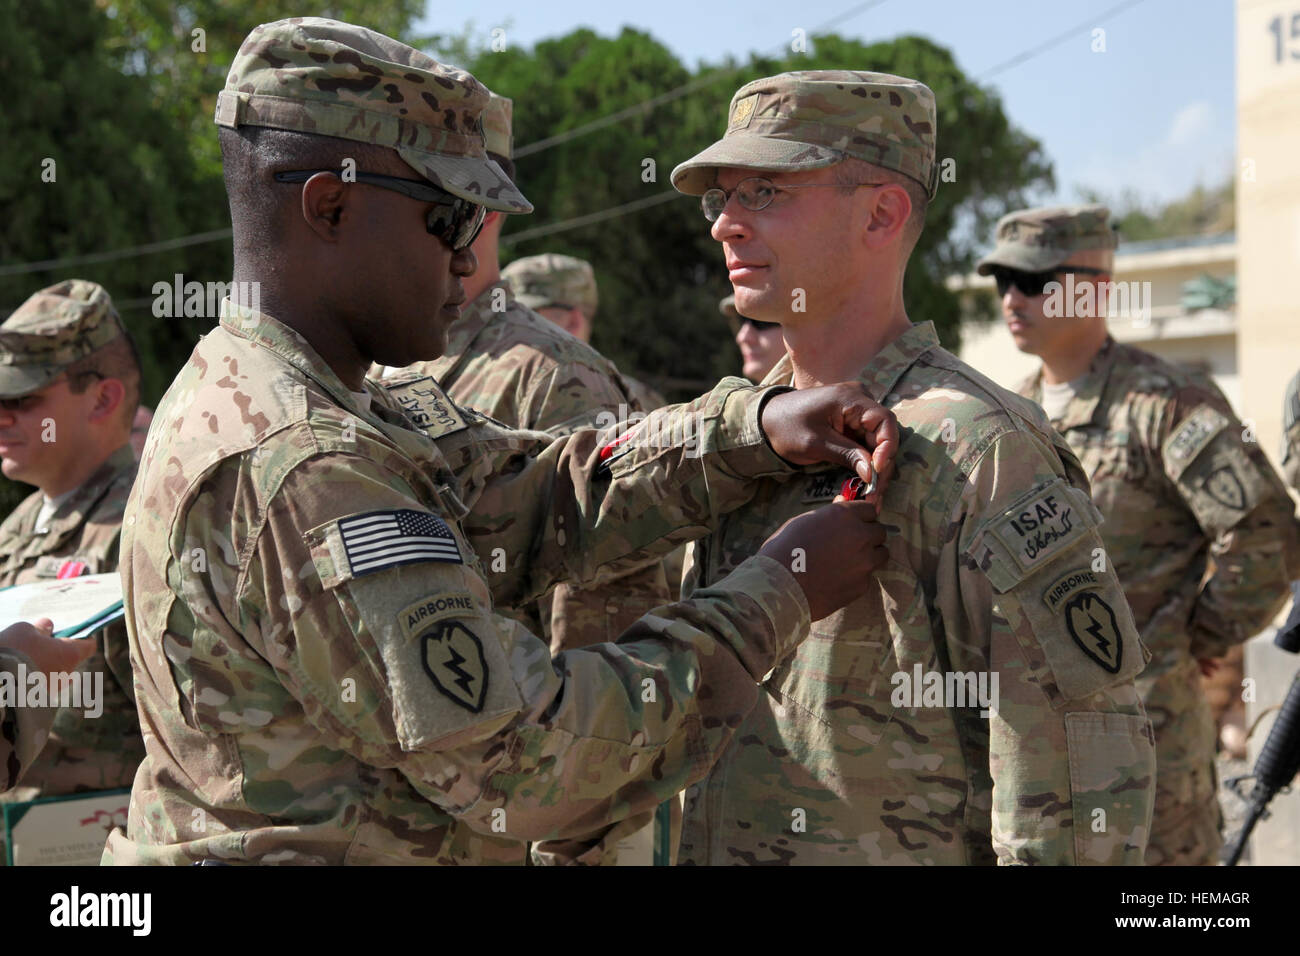 U.S. Army Maj. Mayer with 425th Brigade Special Troops Battalion (Airborne), Task Force 4-25, is awarded the Bronze Star Medal by U.S. Army Lt. Col. Frank Smith, battalion commander for 425th Brigade Special Troops Battalion (Airborne), on Forward Operating Base Salerno, Khost province, Afghanistan, Sept. 29, 2012. Award ceremony 120929-A-PO167-025 Stock Photo